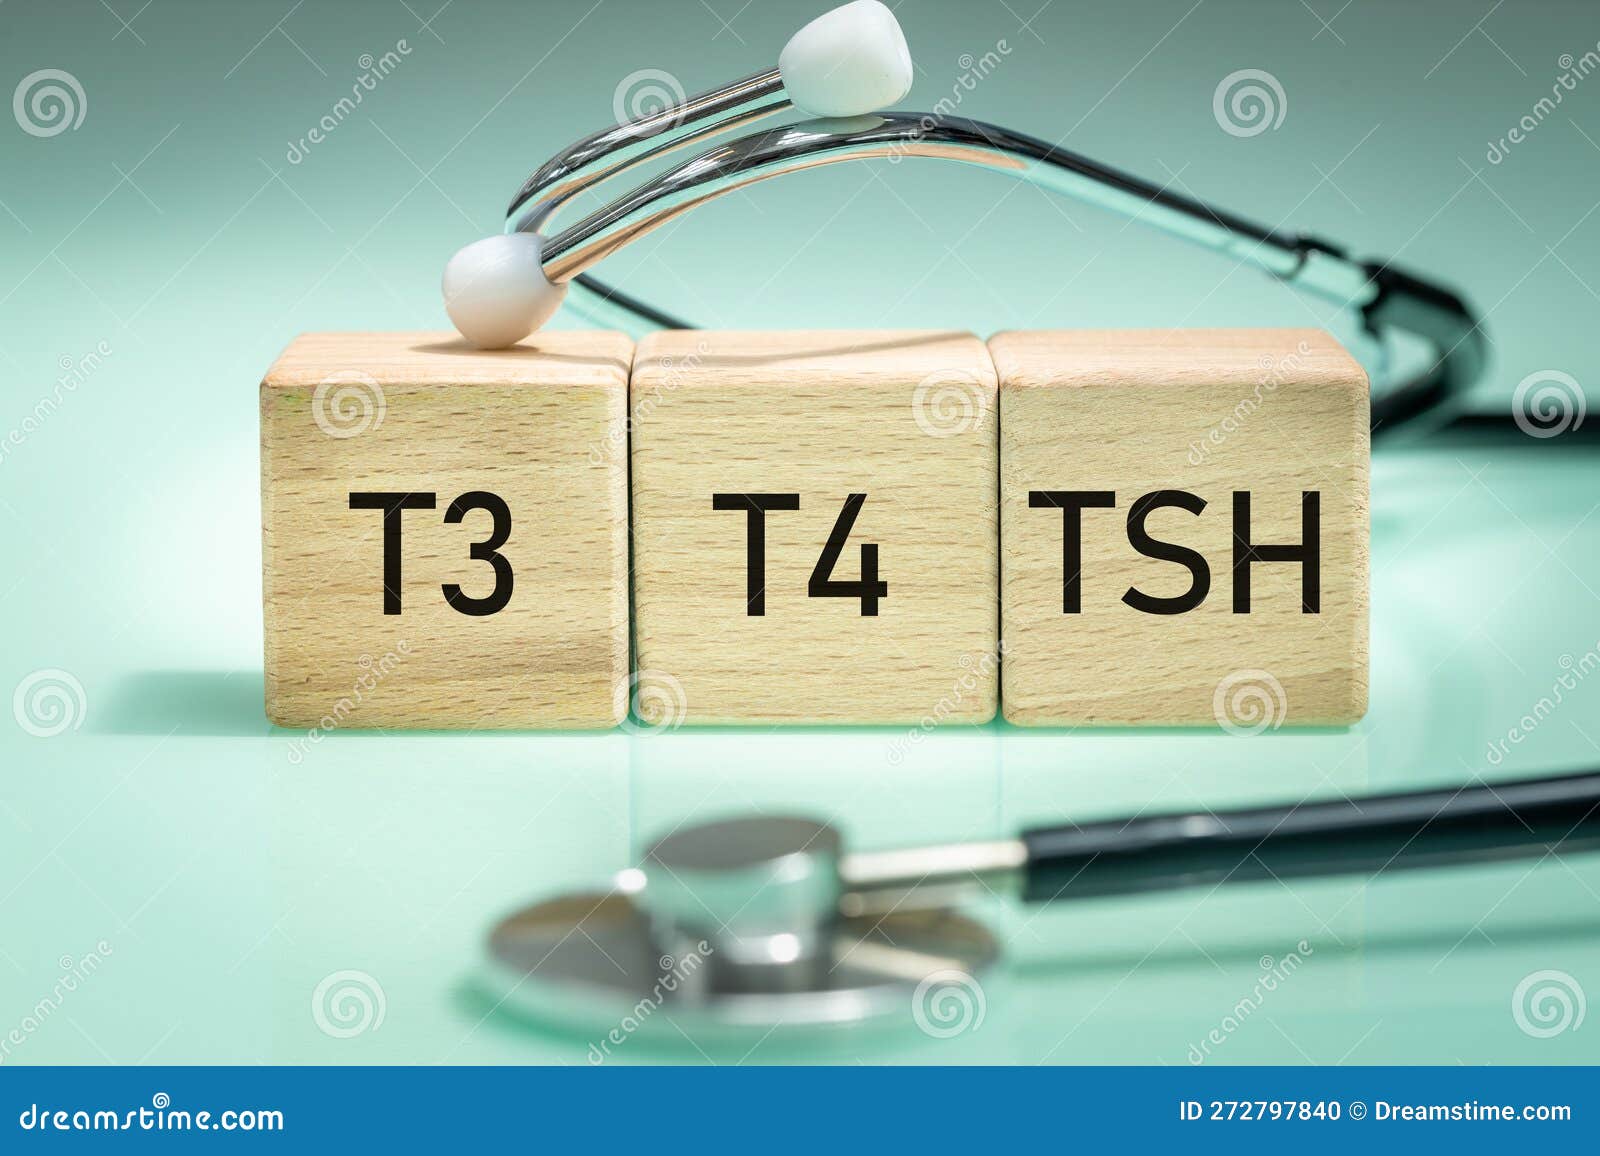 tsh, diagnosis of thyroid diseases, medical examination of t3 and t4, production and secretion of hormones, hypothyroidism or